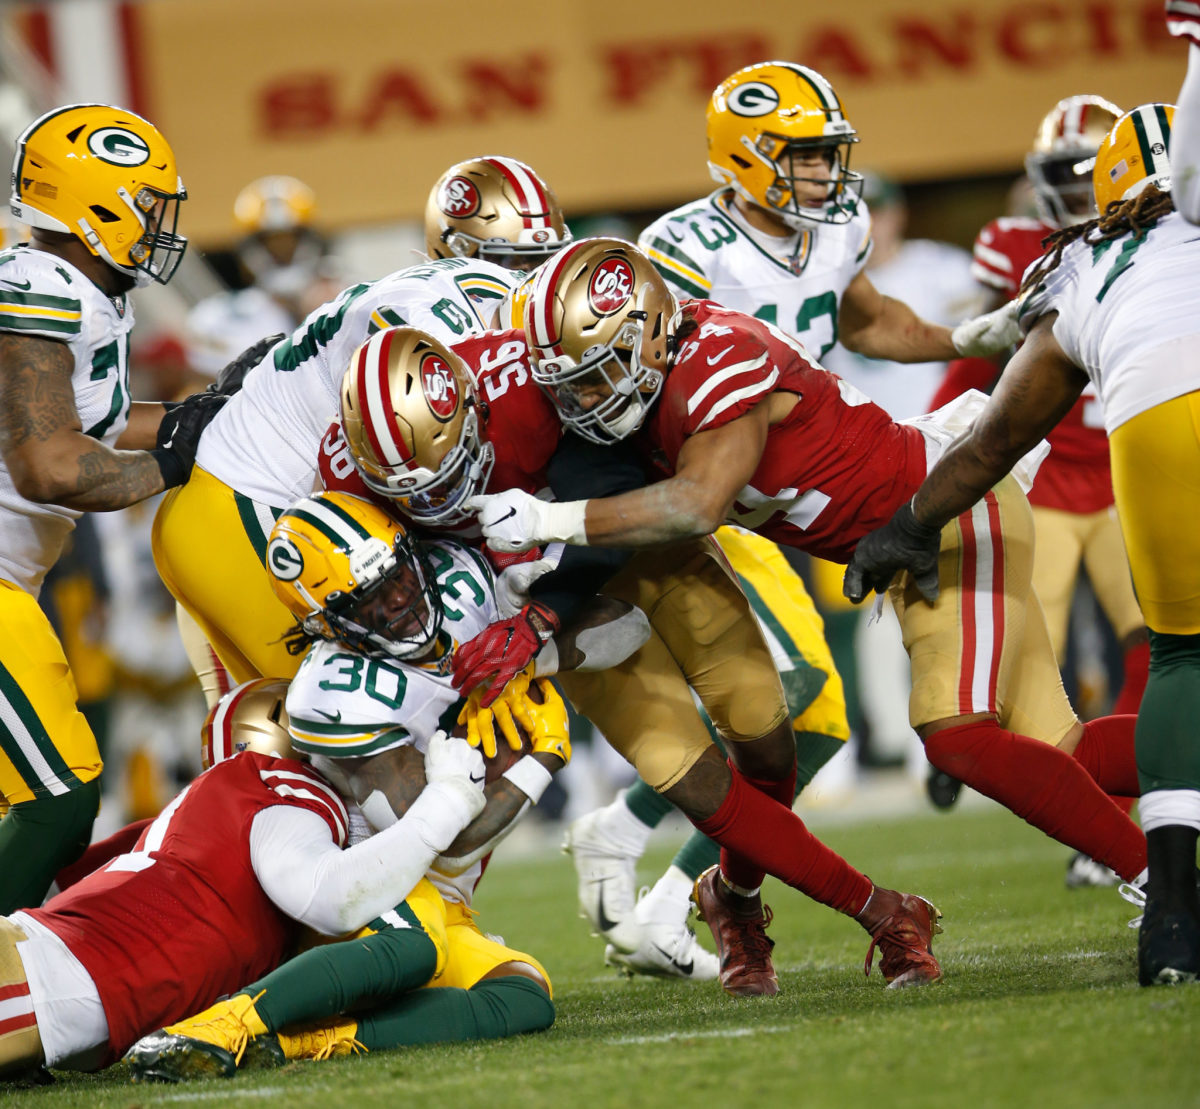 Kwon Alexander and 49ers gang tackle against Packers.